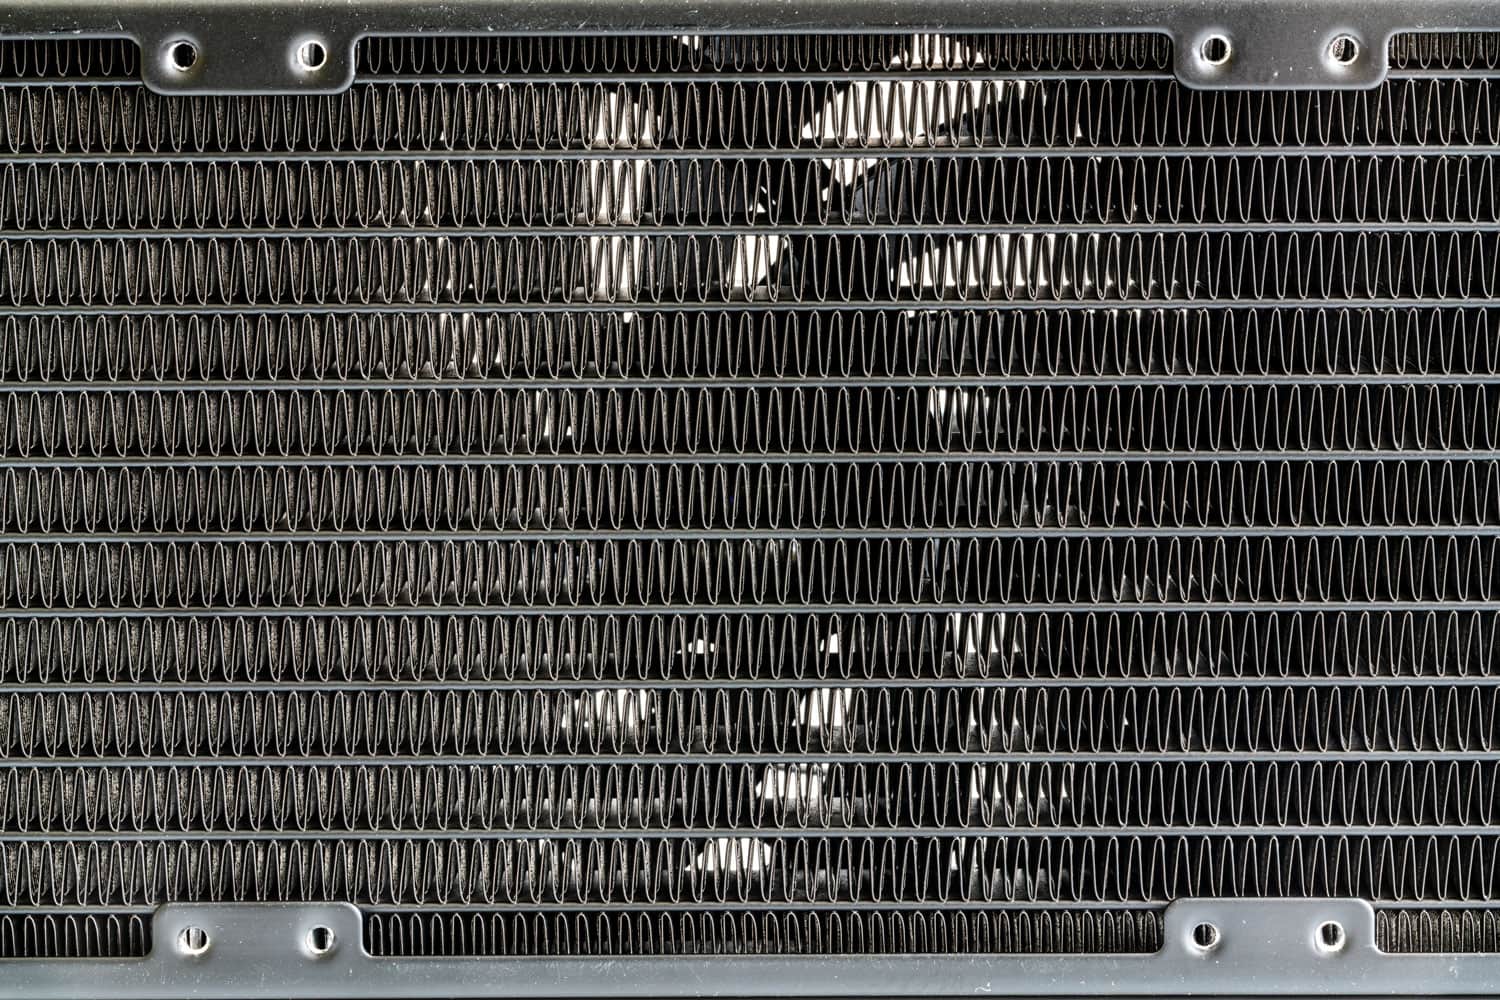 Cooling coil and fan of a air conditioning unit